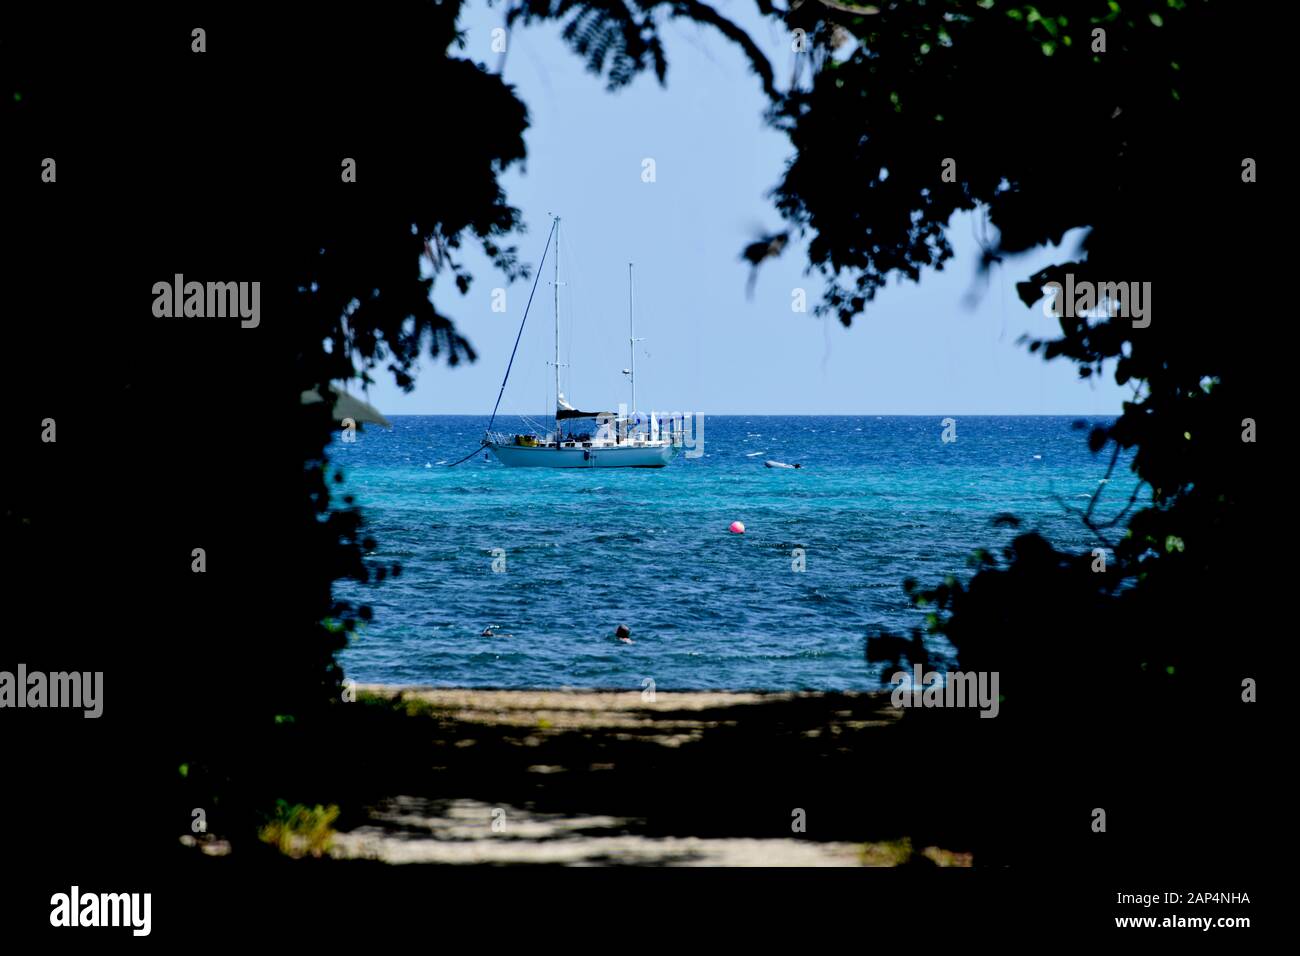 View of sailing boat on blue Great Barrier Reef Australia and person swimming looking from shaded trees of an island Stock Photo